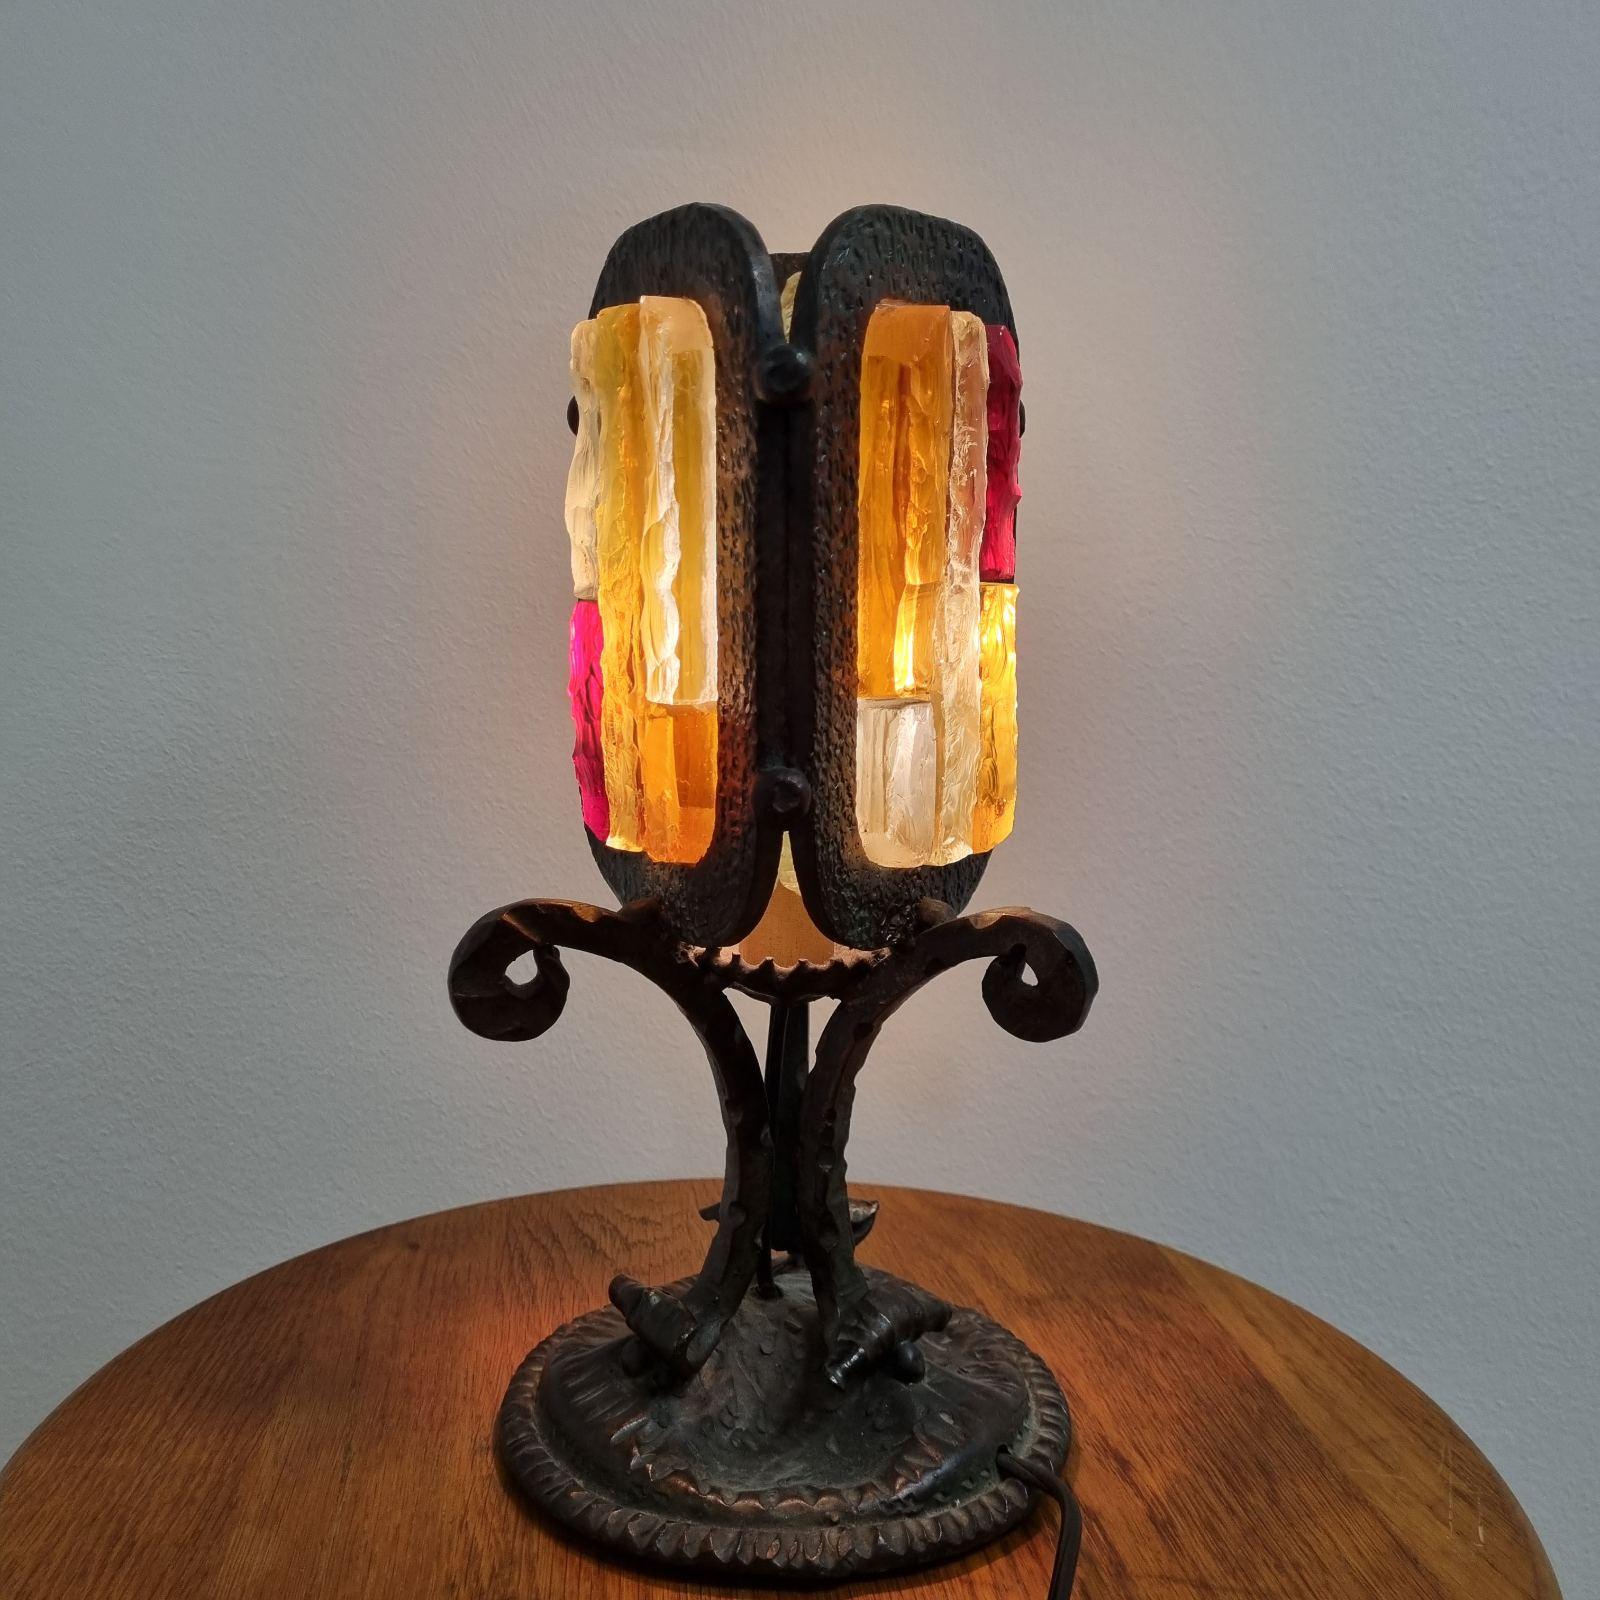 Glass Italian Brutalist Table Lamp by Longobard, Italy 60s For Sale